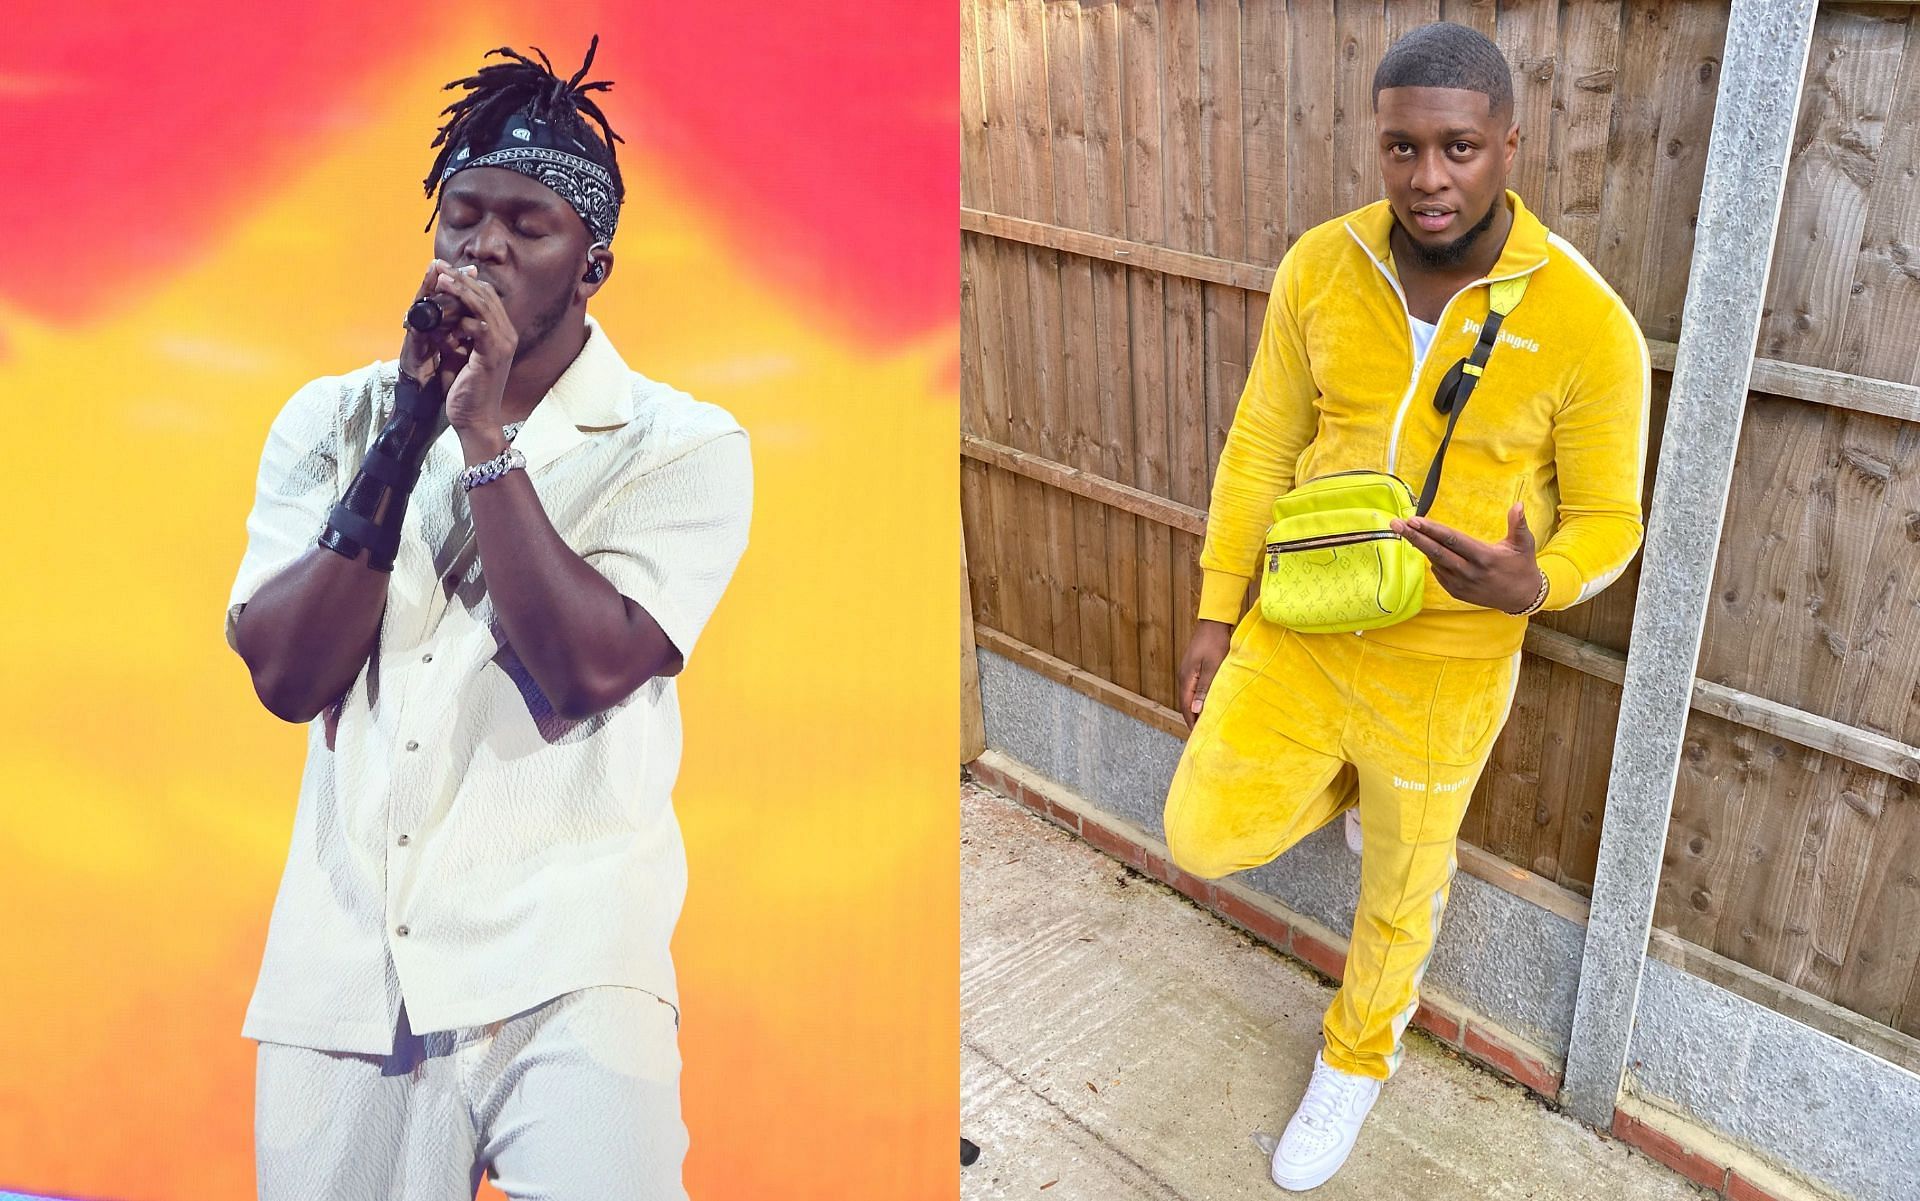 YouTuber stars KSI (L), and Swarmz (R). [Images via Getty and @Swarmz on Twitter_]